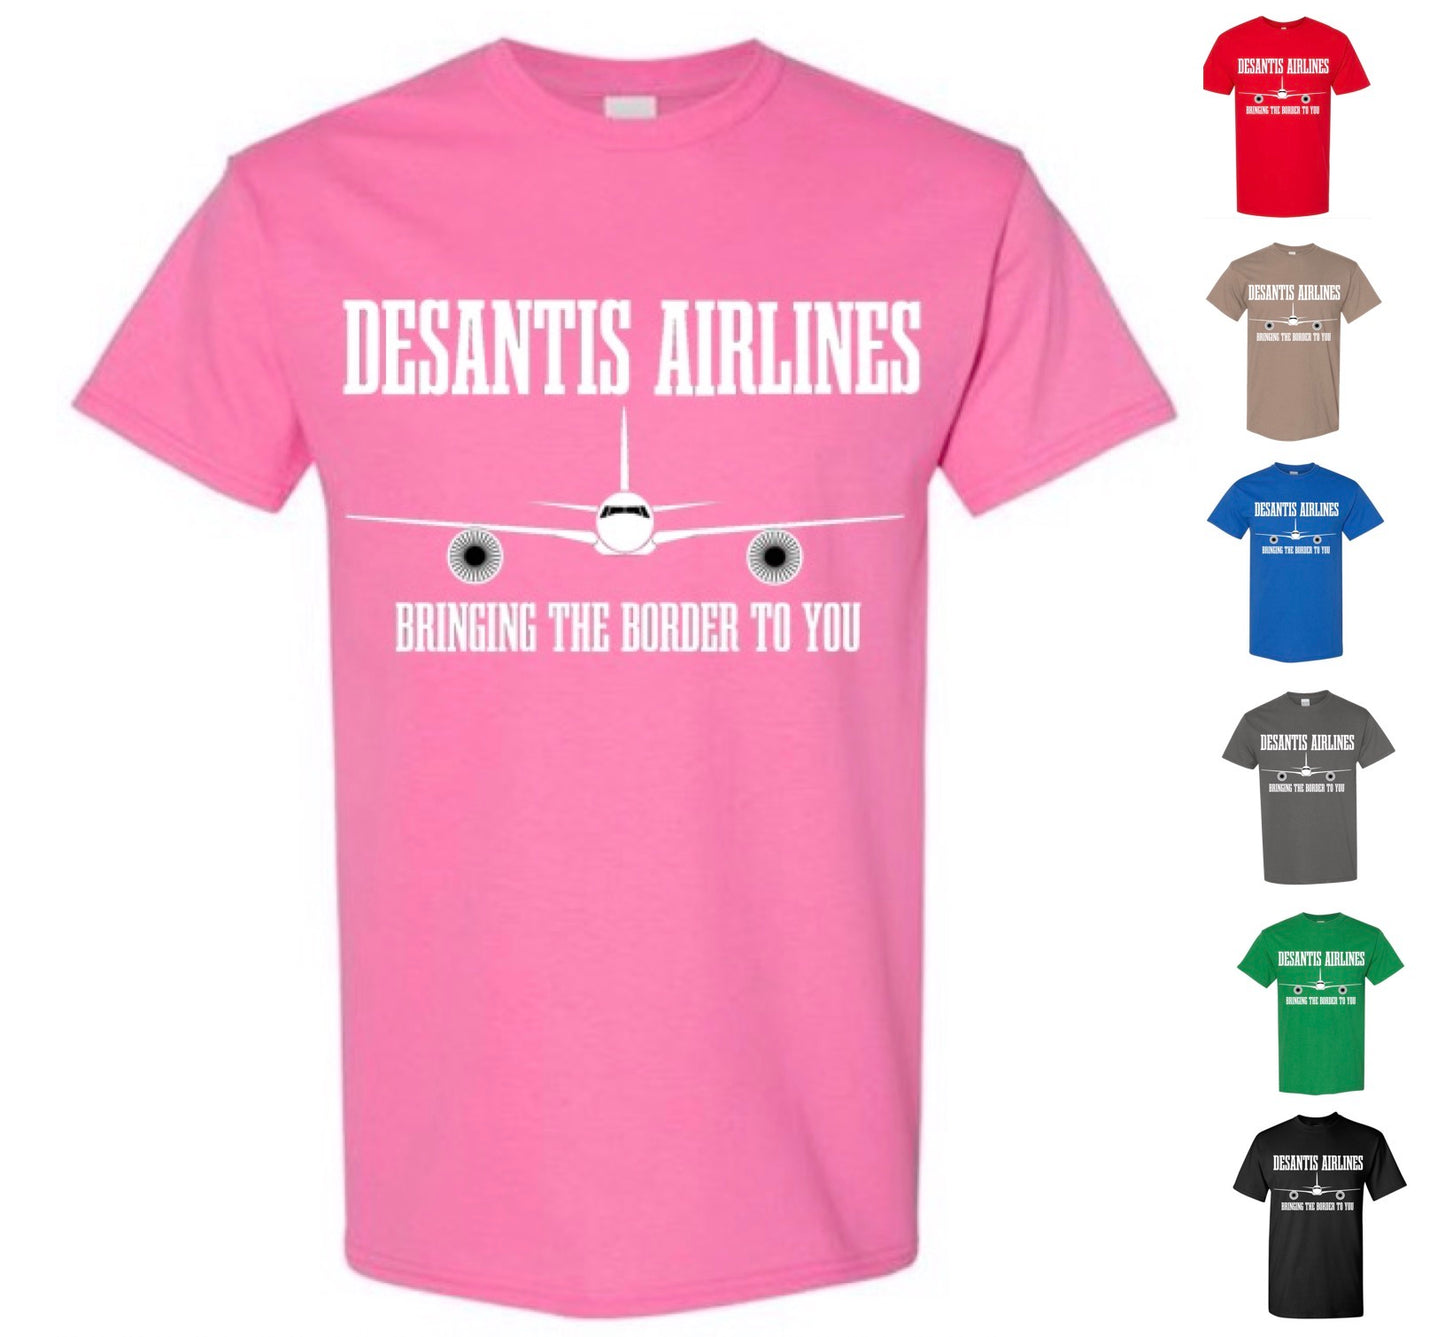 DeSantis Airlines T-Shirt, Bringing The Border To You!